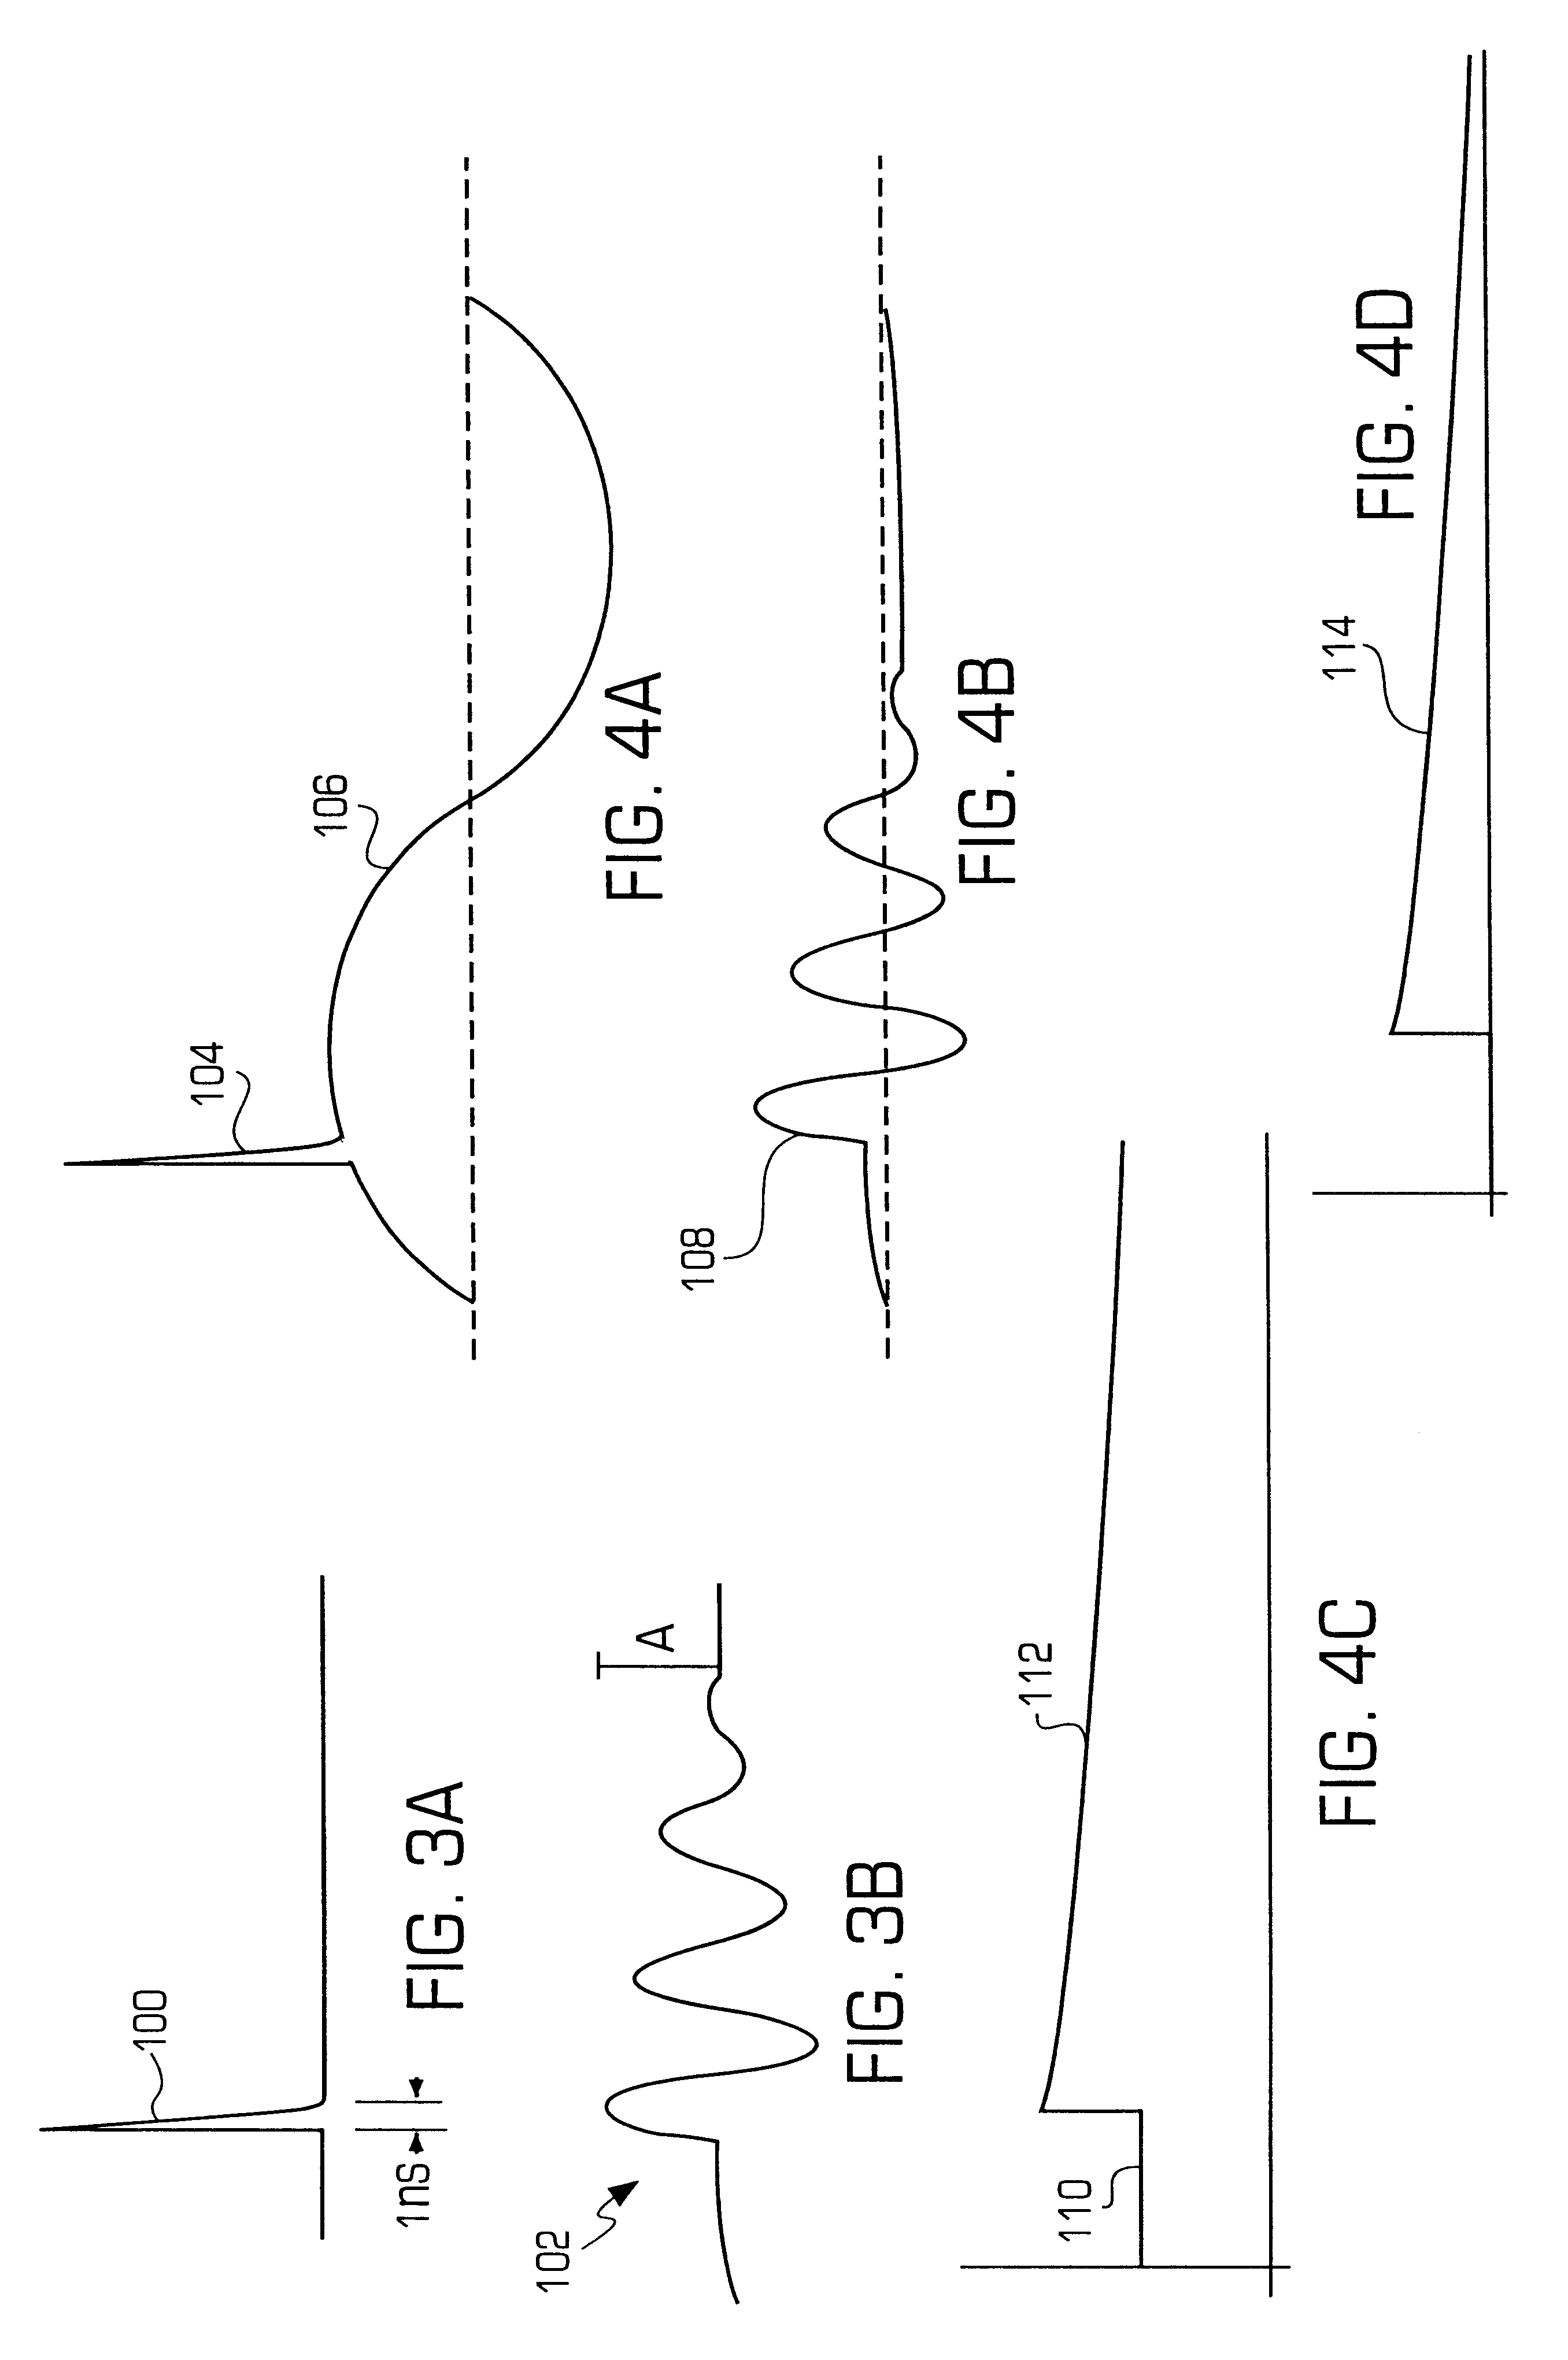 Electrostatic discharges and transient signals monitoring system and method